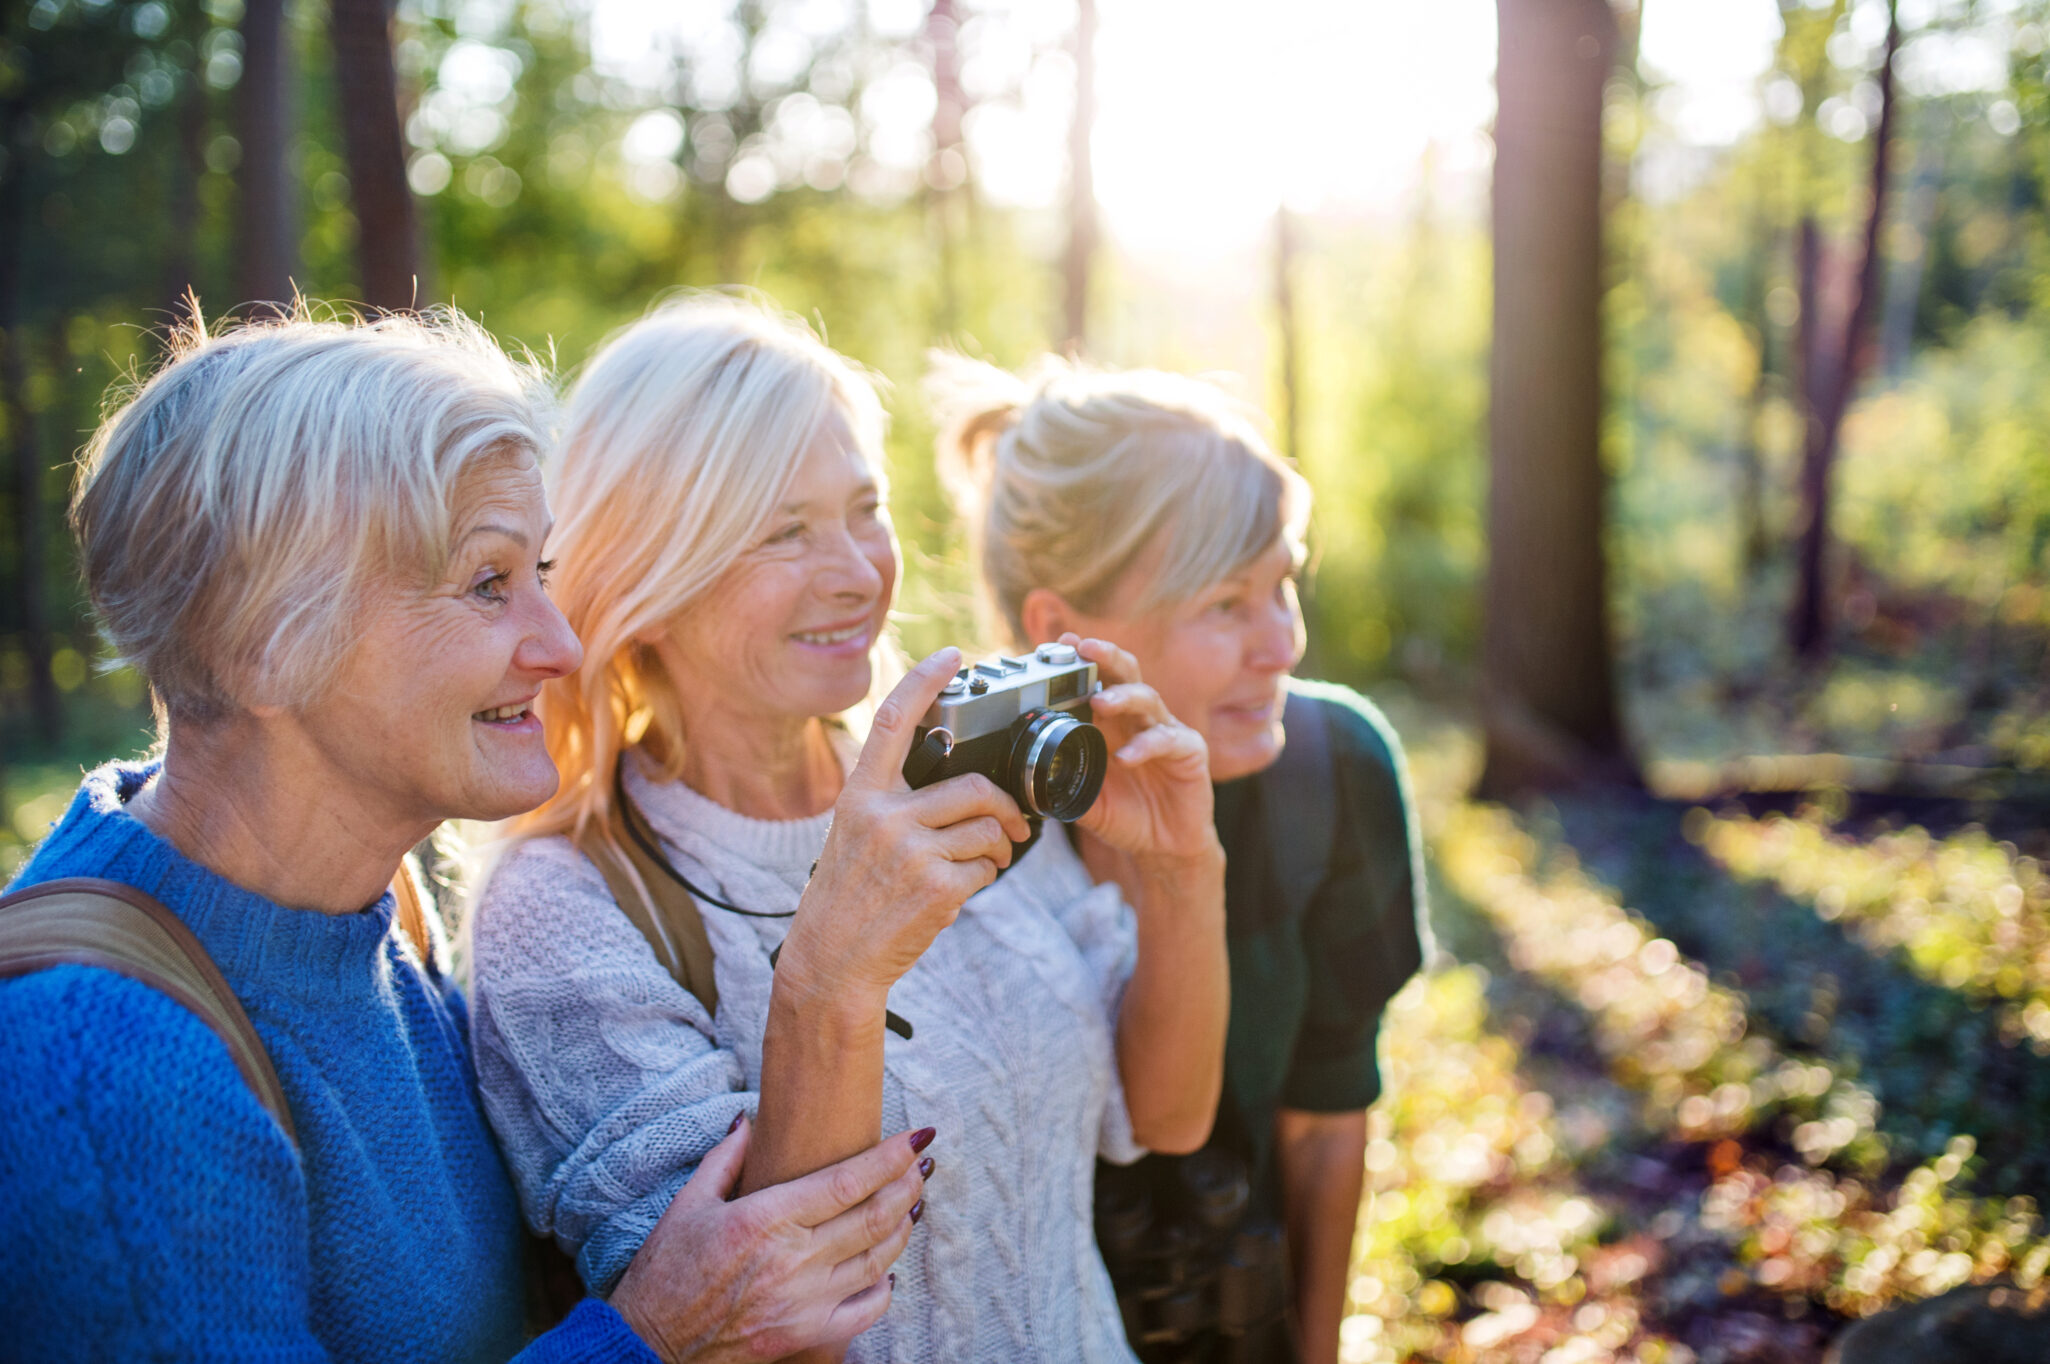 friends enjoying one of the best outdoor activities for seniors, photography in nature